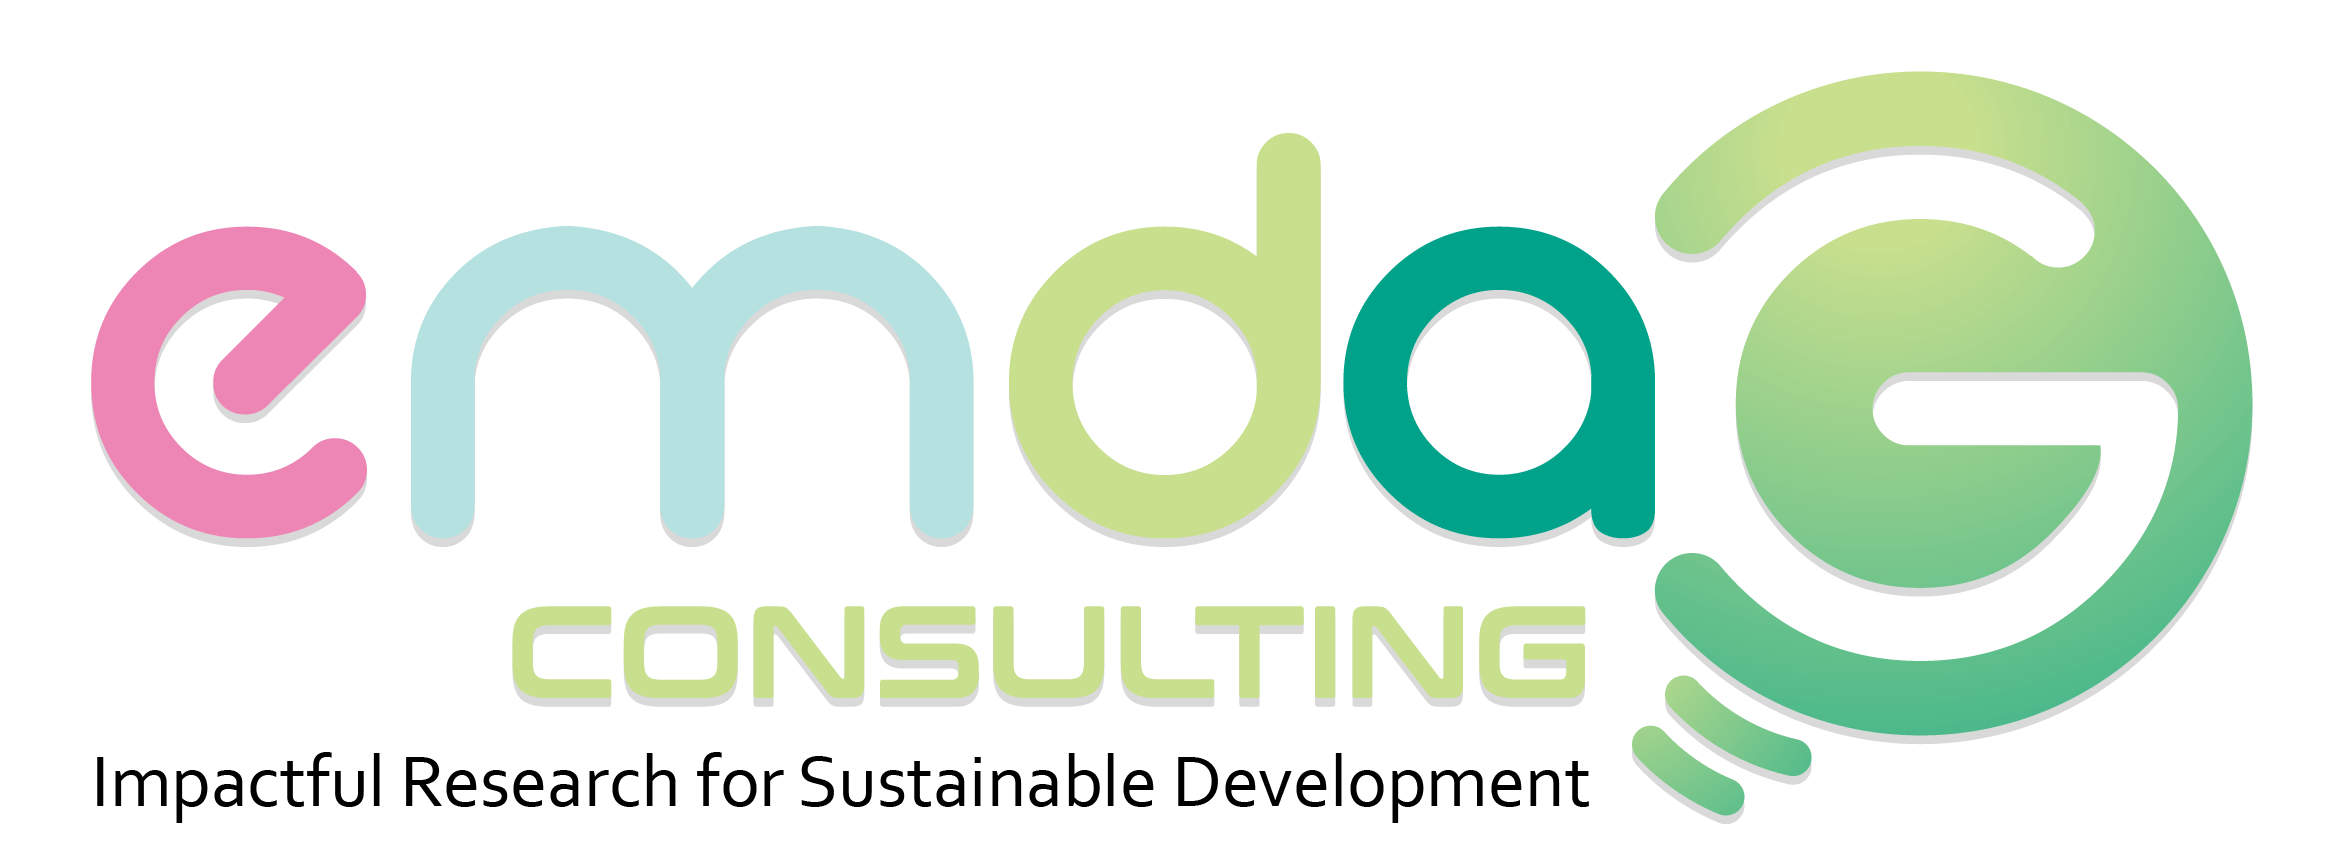 Emdag Consulting-Impactful Research for Sustainable Development